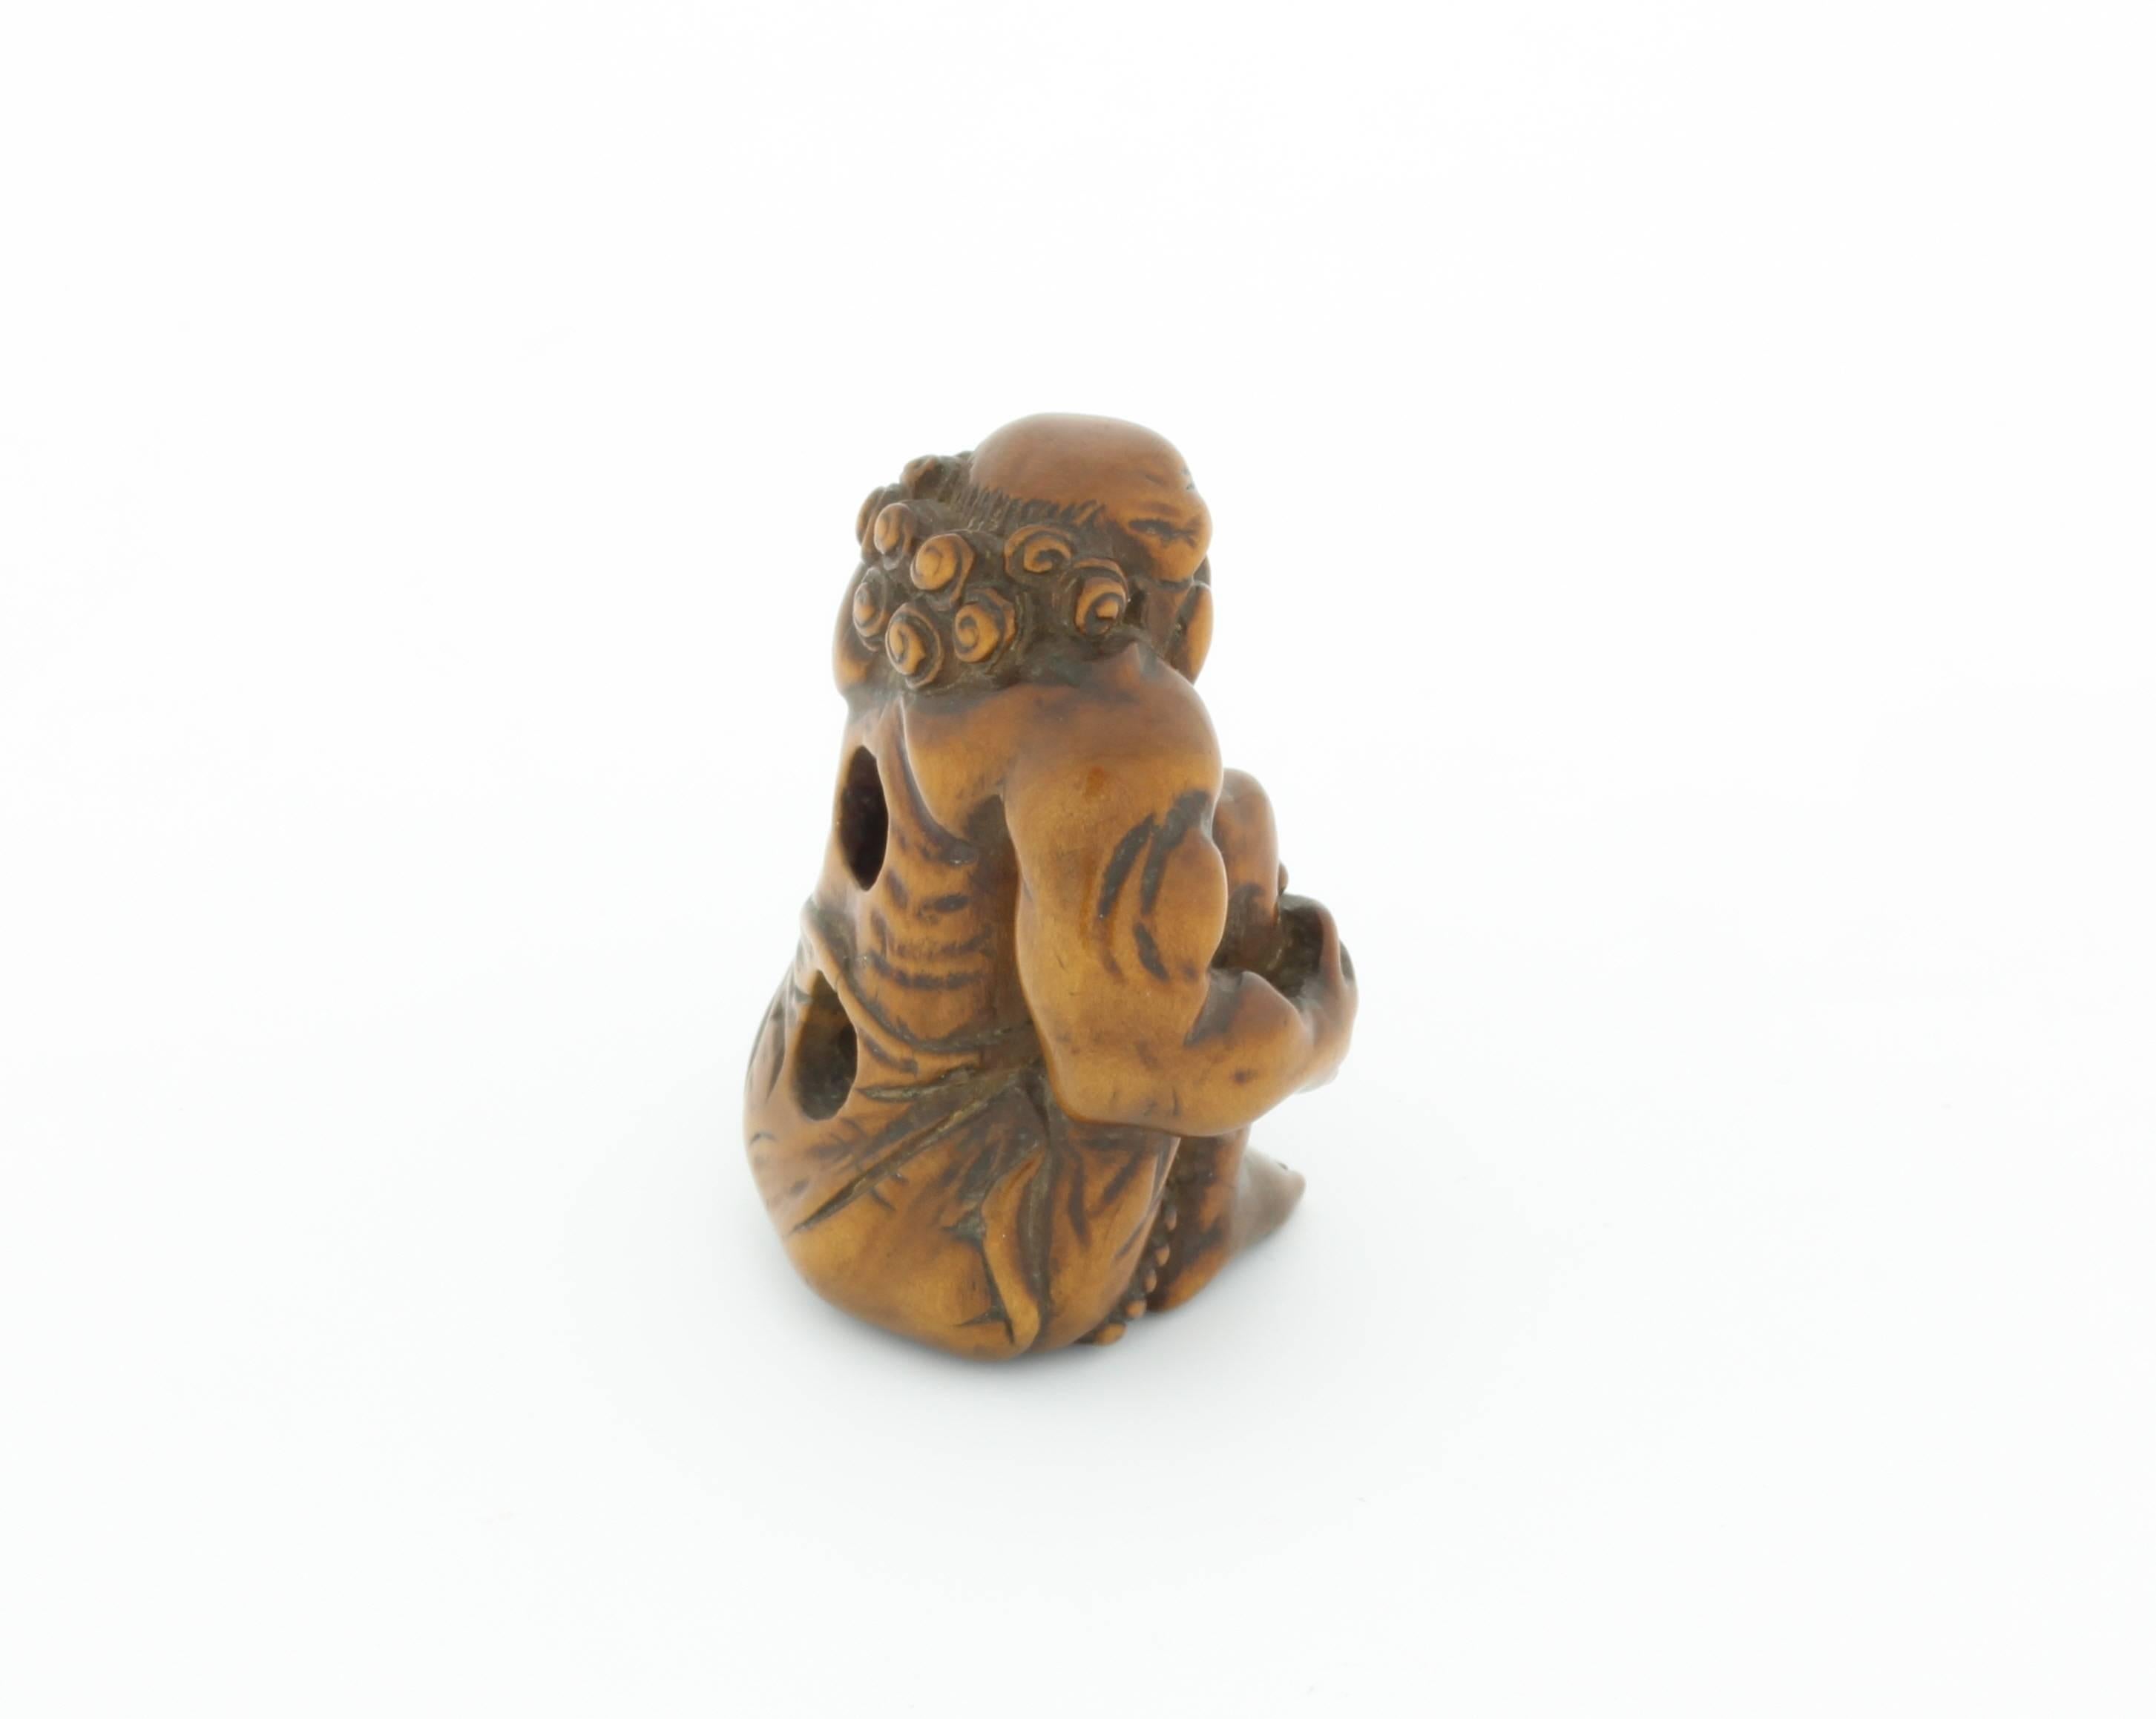 Hand-Carved Netsuke, Wood, Accessory, Fashion, 19th century, Antique, Woodcraft, Carving